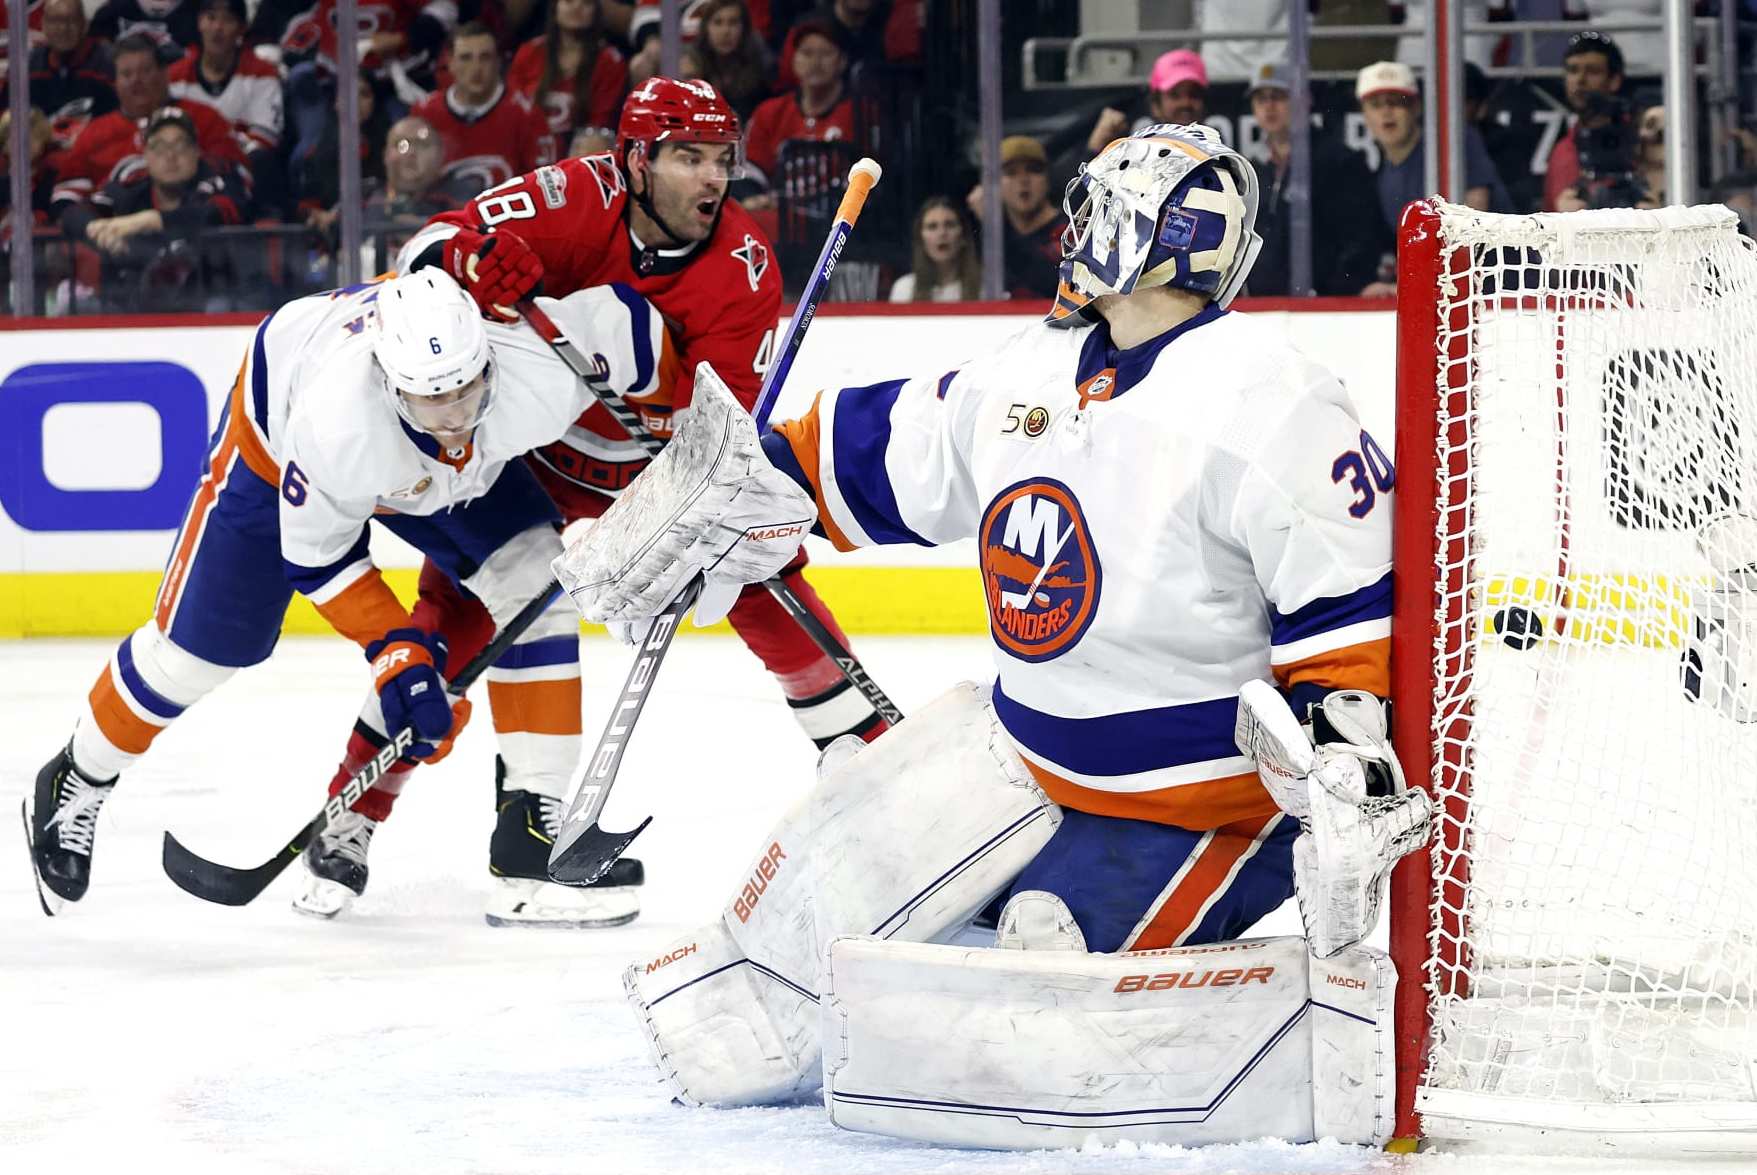 NHL playoffs: Rangers win Game 7 against Hurricanes, to play Lightning